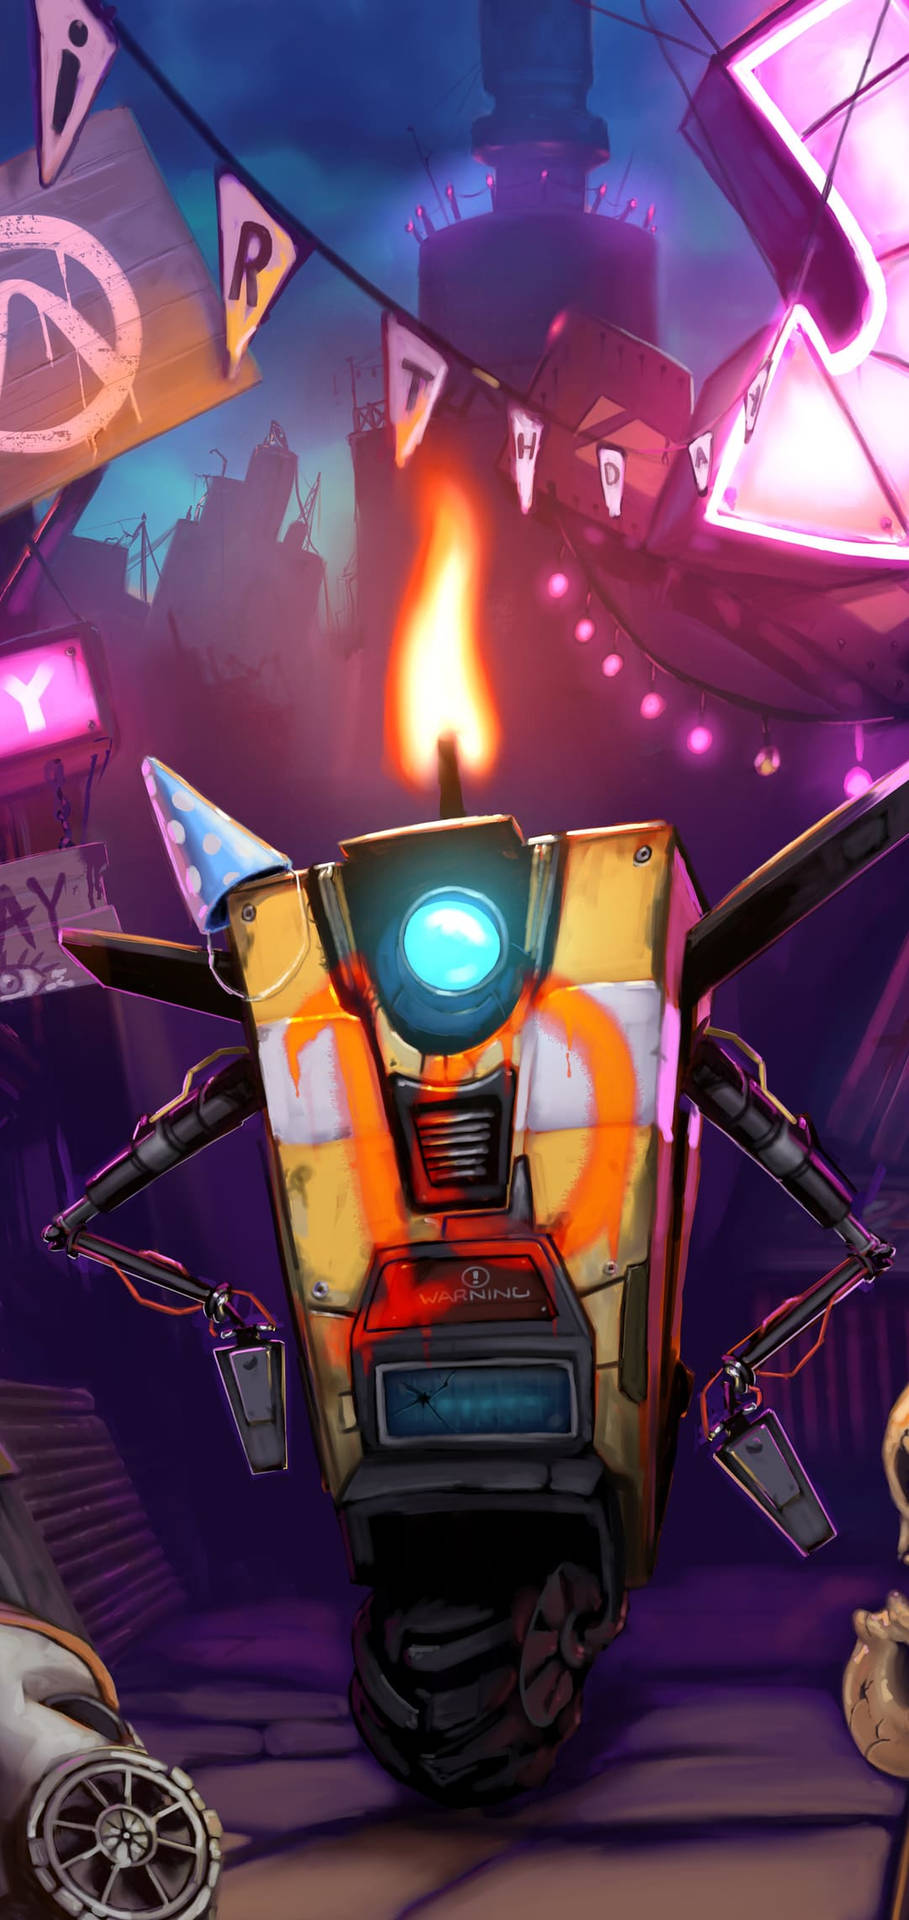 Take on the challenges ahead with the new Borderlands iPhone Wallpaper